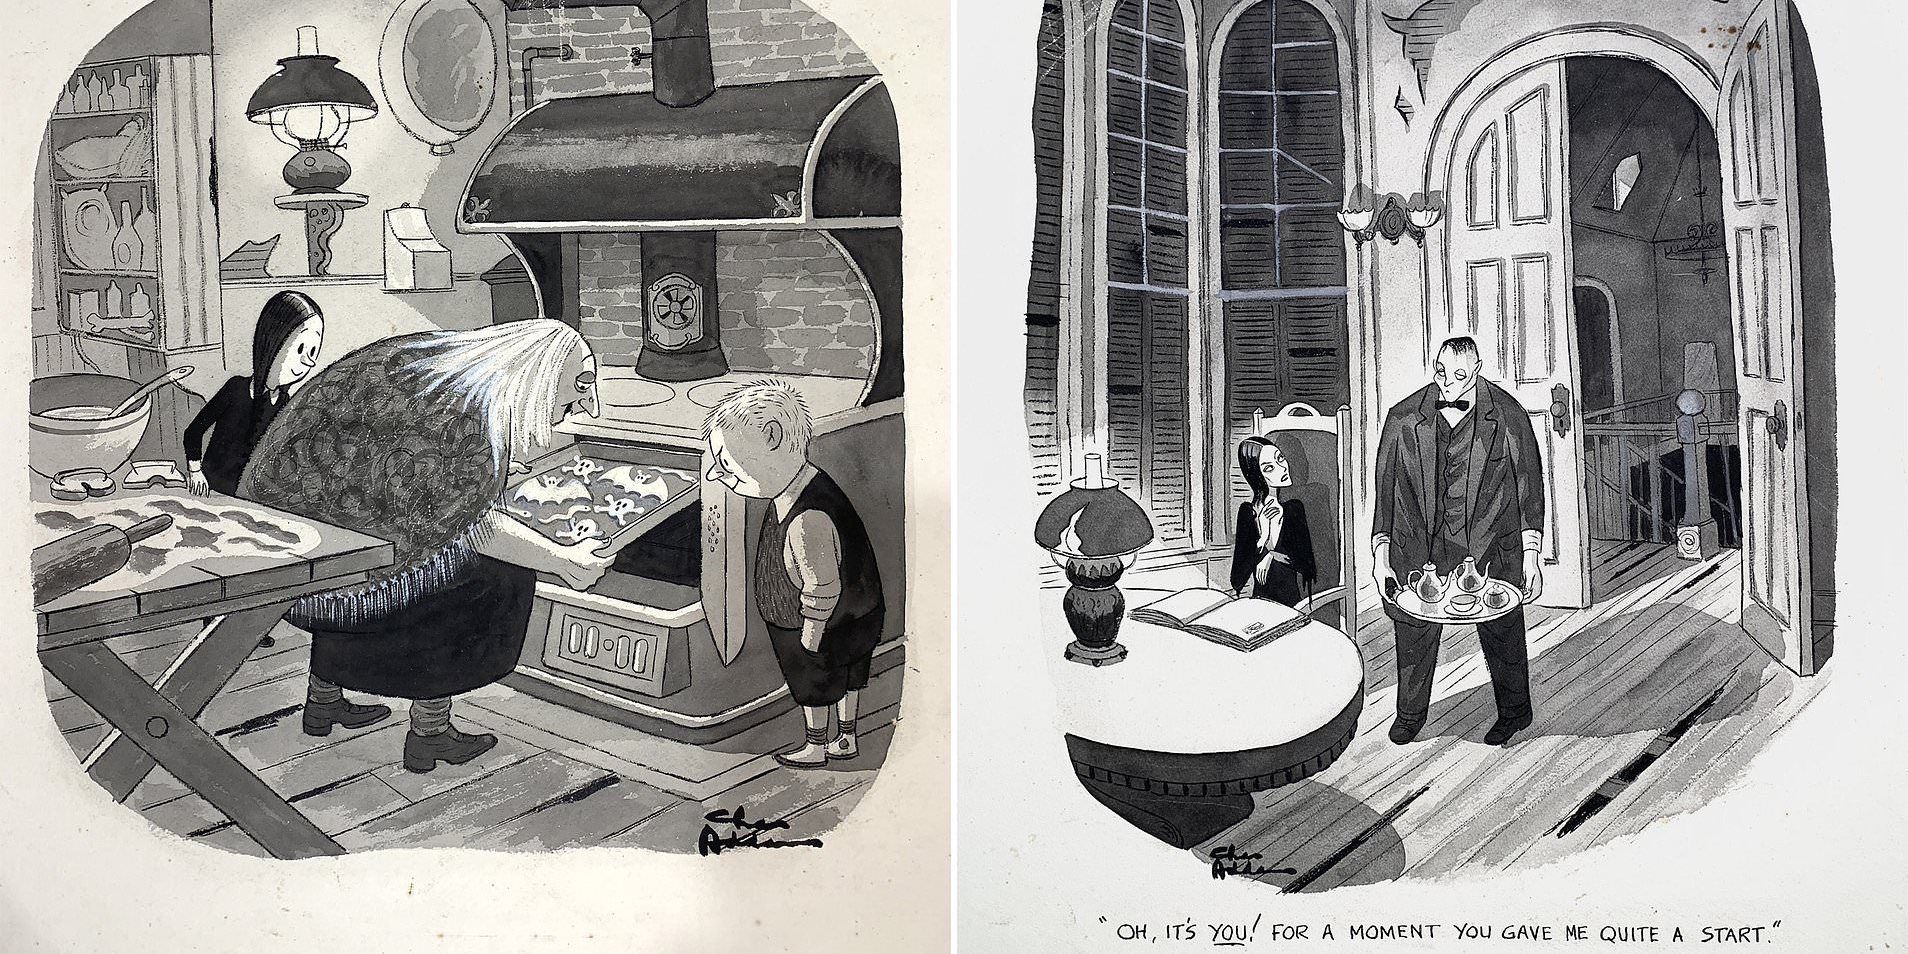 The Addams family in the original comic strip cooking and having tea